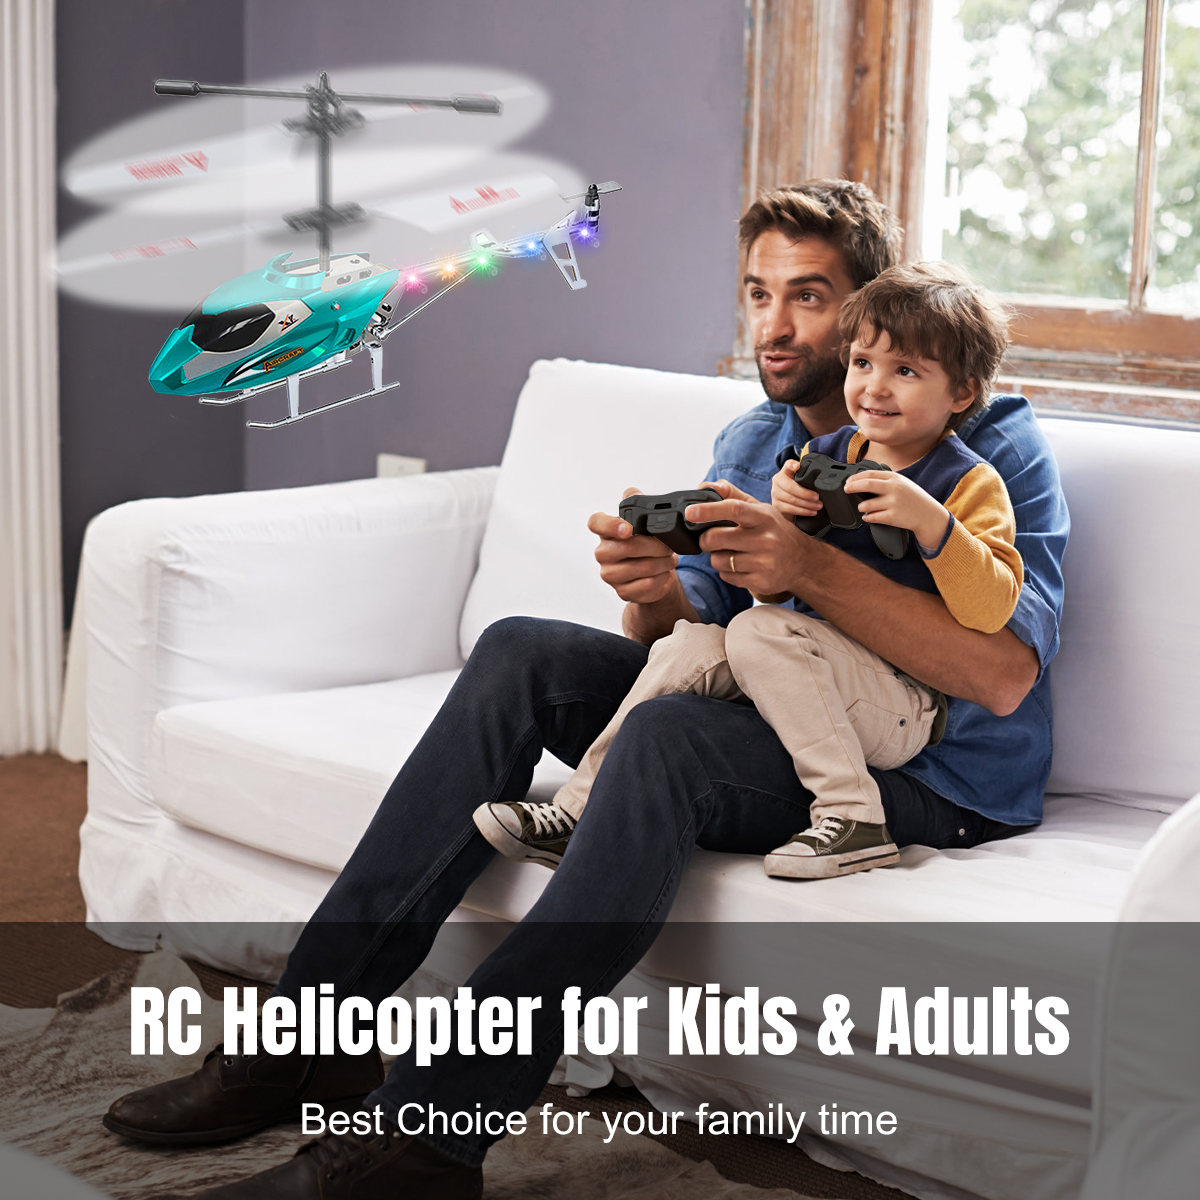 PayUSD Remote Control Helicopter Mini Gyroscope RC Helicopters LED Light for Indoor to Fly for Kids and Beginners, Blue - image 2 of 8